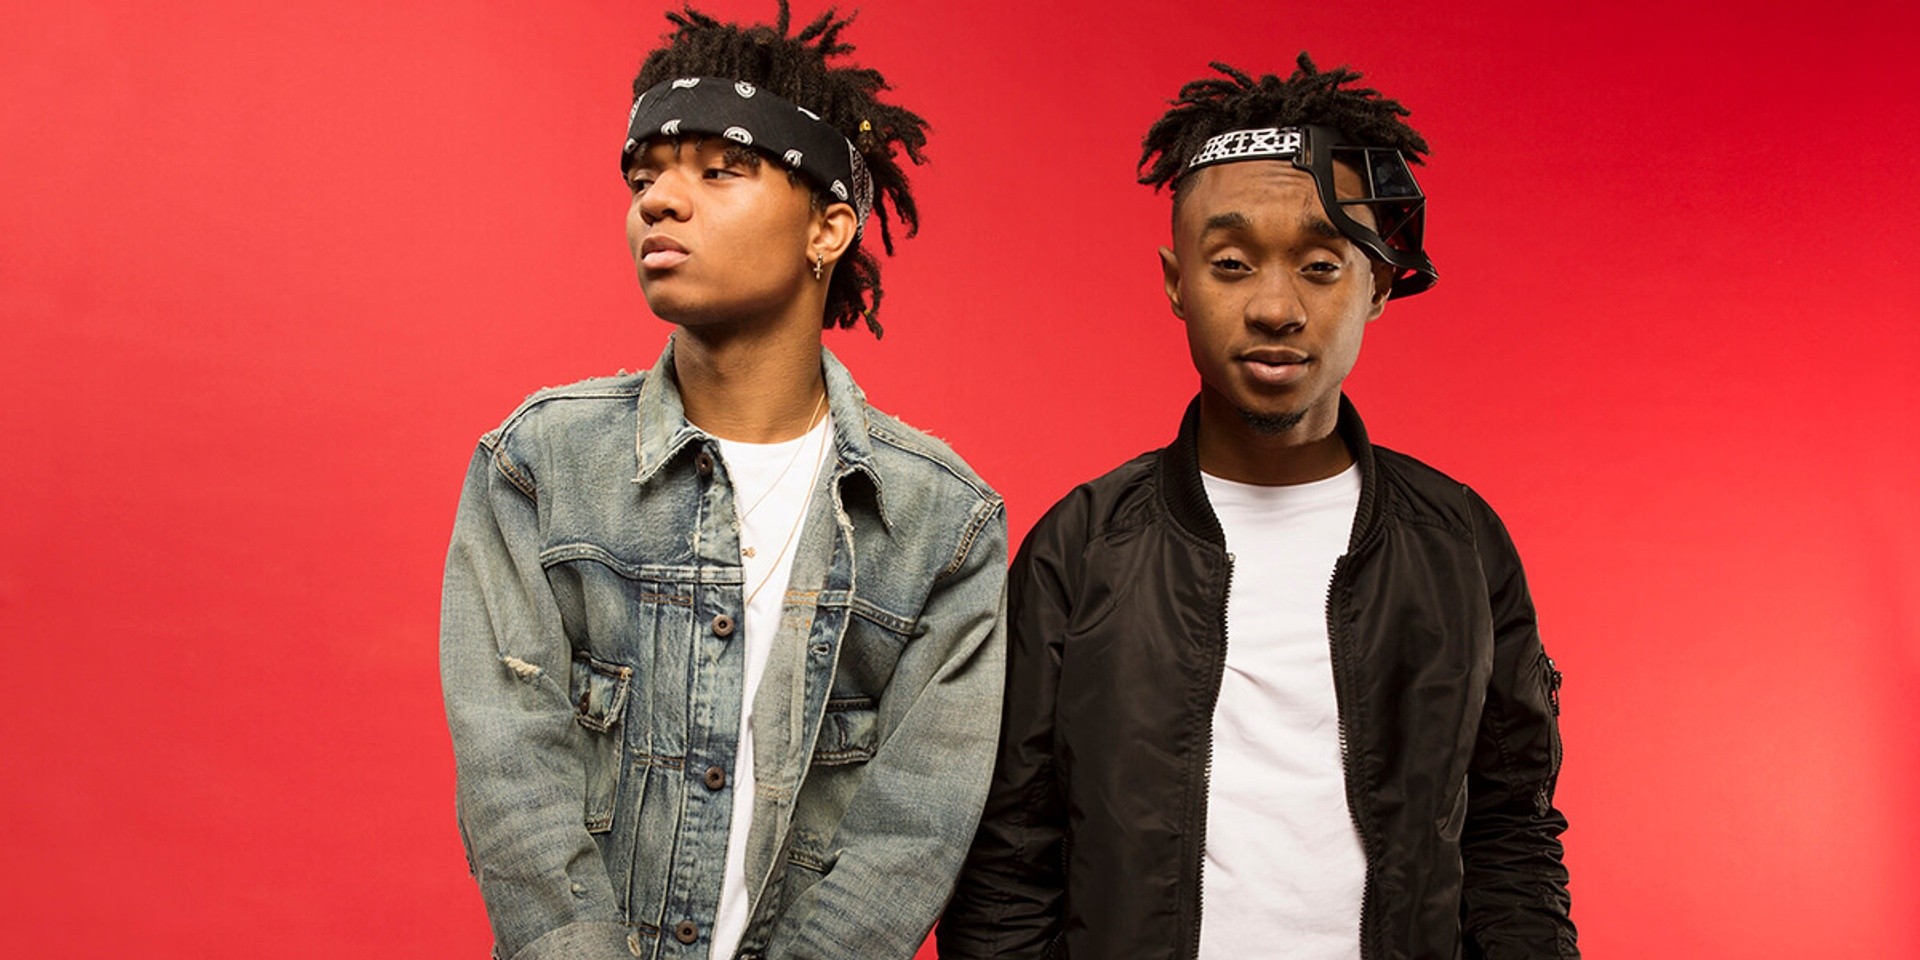 RAE SREMMURD to appear at Marquee Singapore this July 